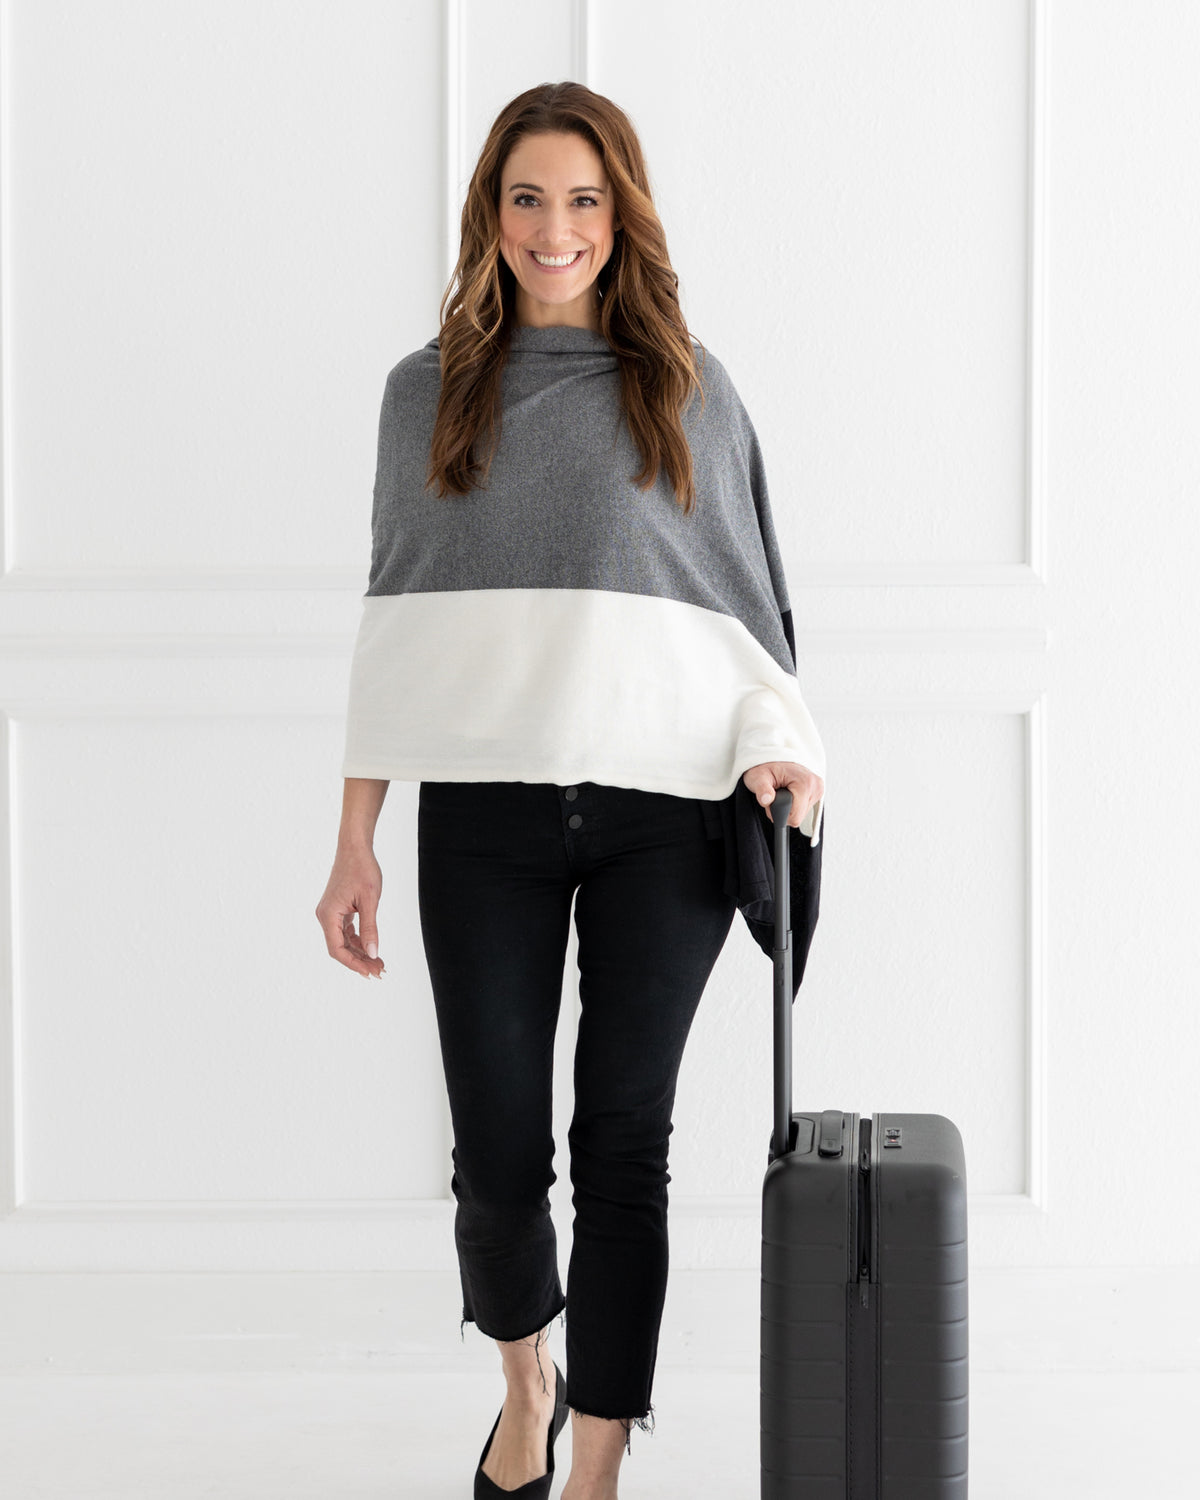 Woman wearing the Dreamsoft Travel Scarf in Gray Colorblock which is a black, gray and cream scarf, hand on a suitcase while smiling